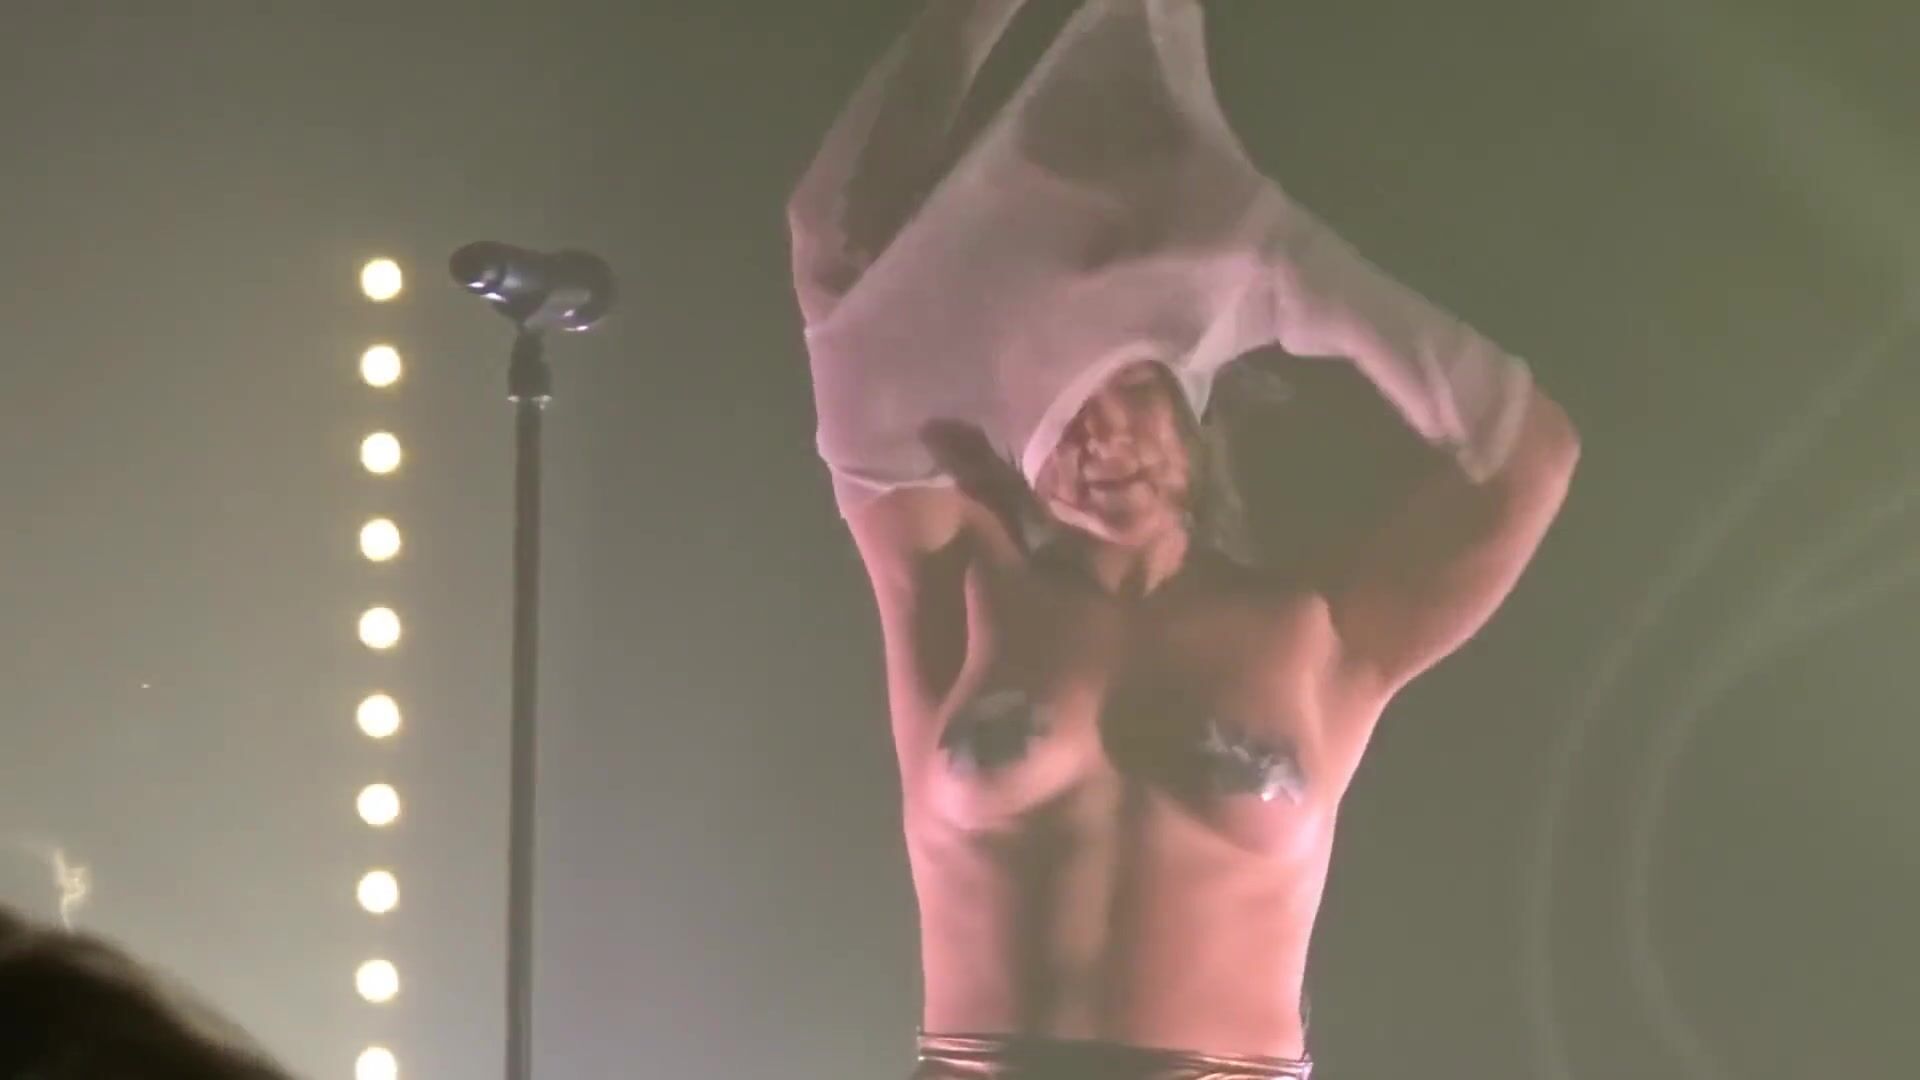 YOBT Concert moments full of shame and excitement when Tove Lo nude exposes boobies on stage Fucking Girls